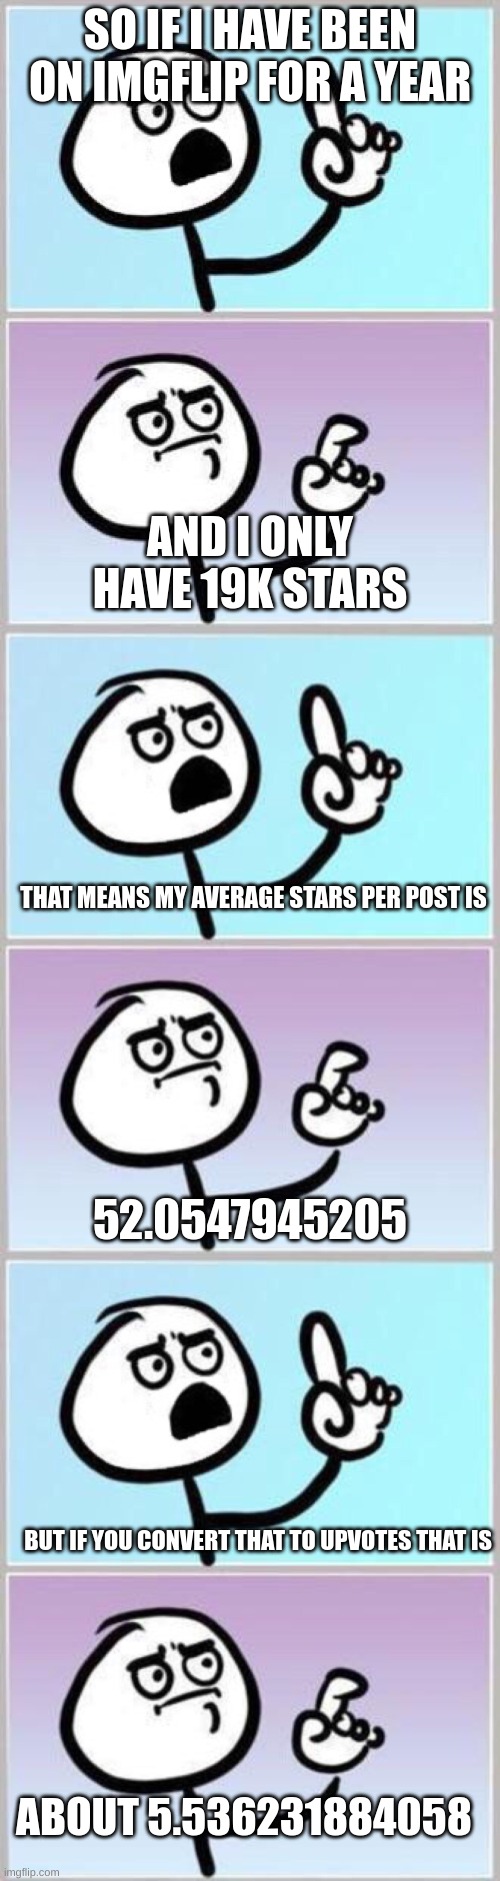 this is 100% true! | SO IF I HAVE BEEN ON IMGFLIP FOR A YEAR; AND I ONLY HAVE 19K STARS; THAT MEANS MY AVERAGE STARS PER POST IS; 52.0547945205; BUT IF YOU CONVERT THAT TO UPVOTES THAT IS; ABOUT 5.536231884058 | image tagged in wait what,math,funny,cool,smart,wow | made w/ Imgflip meme maker